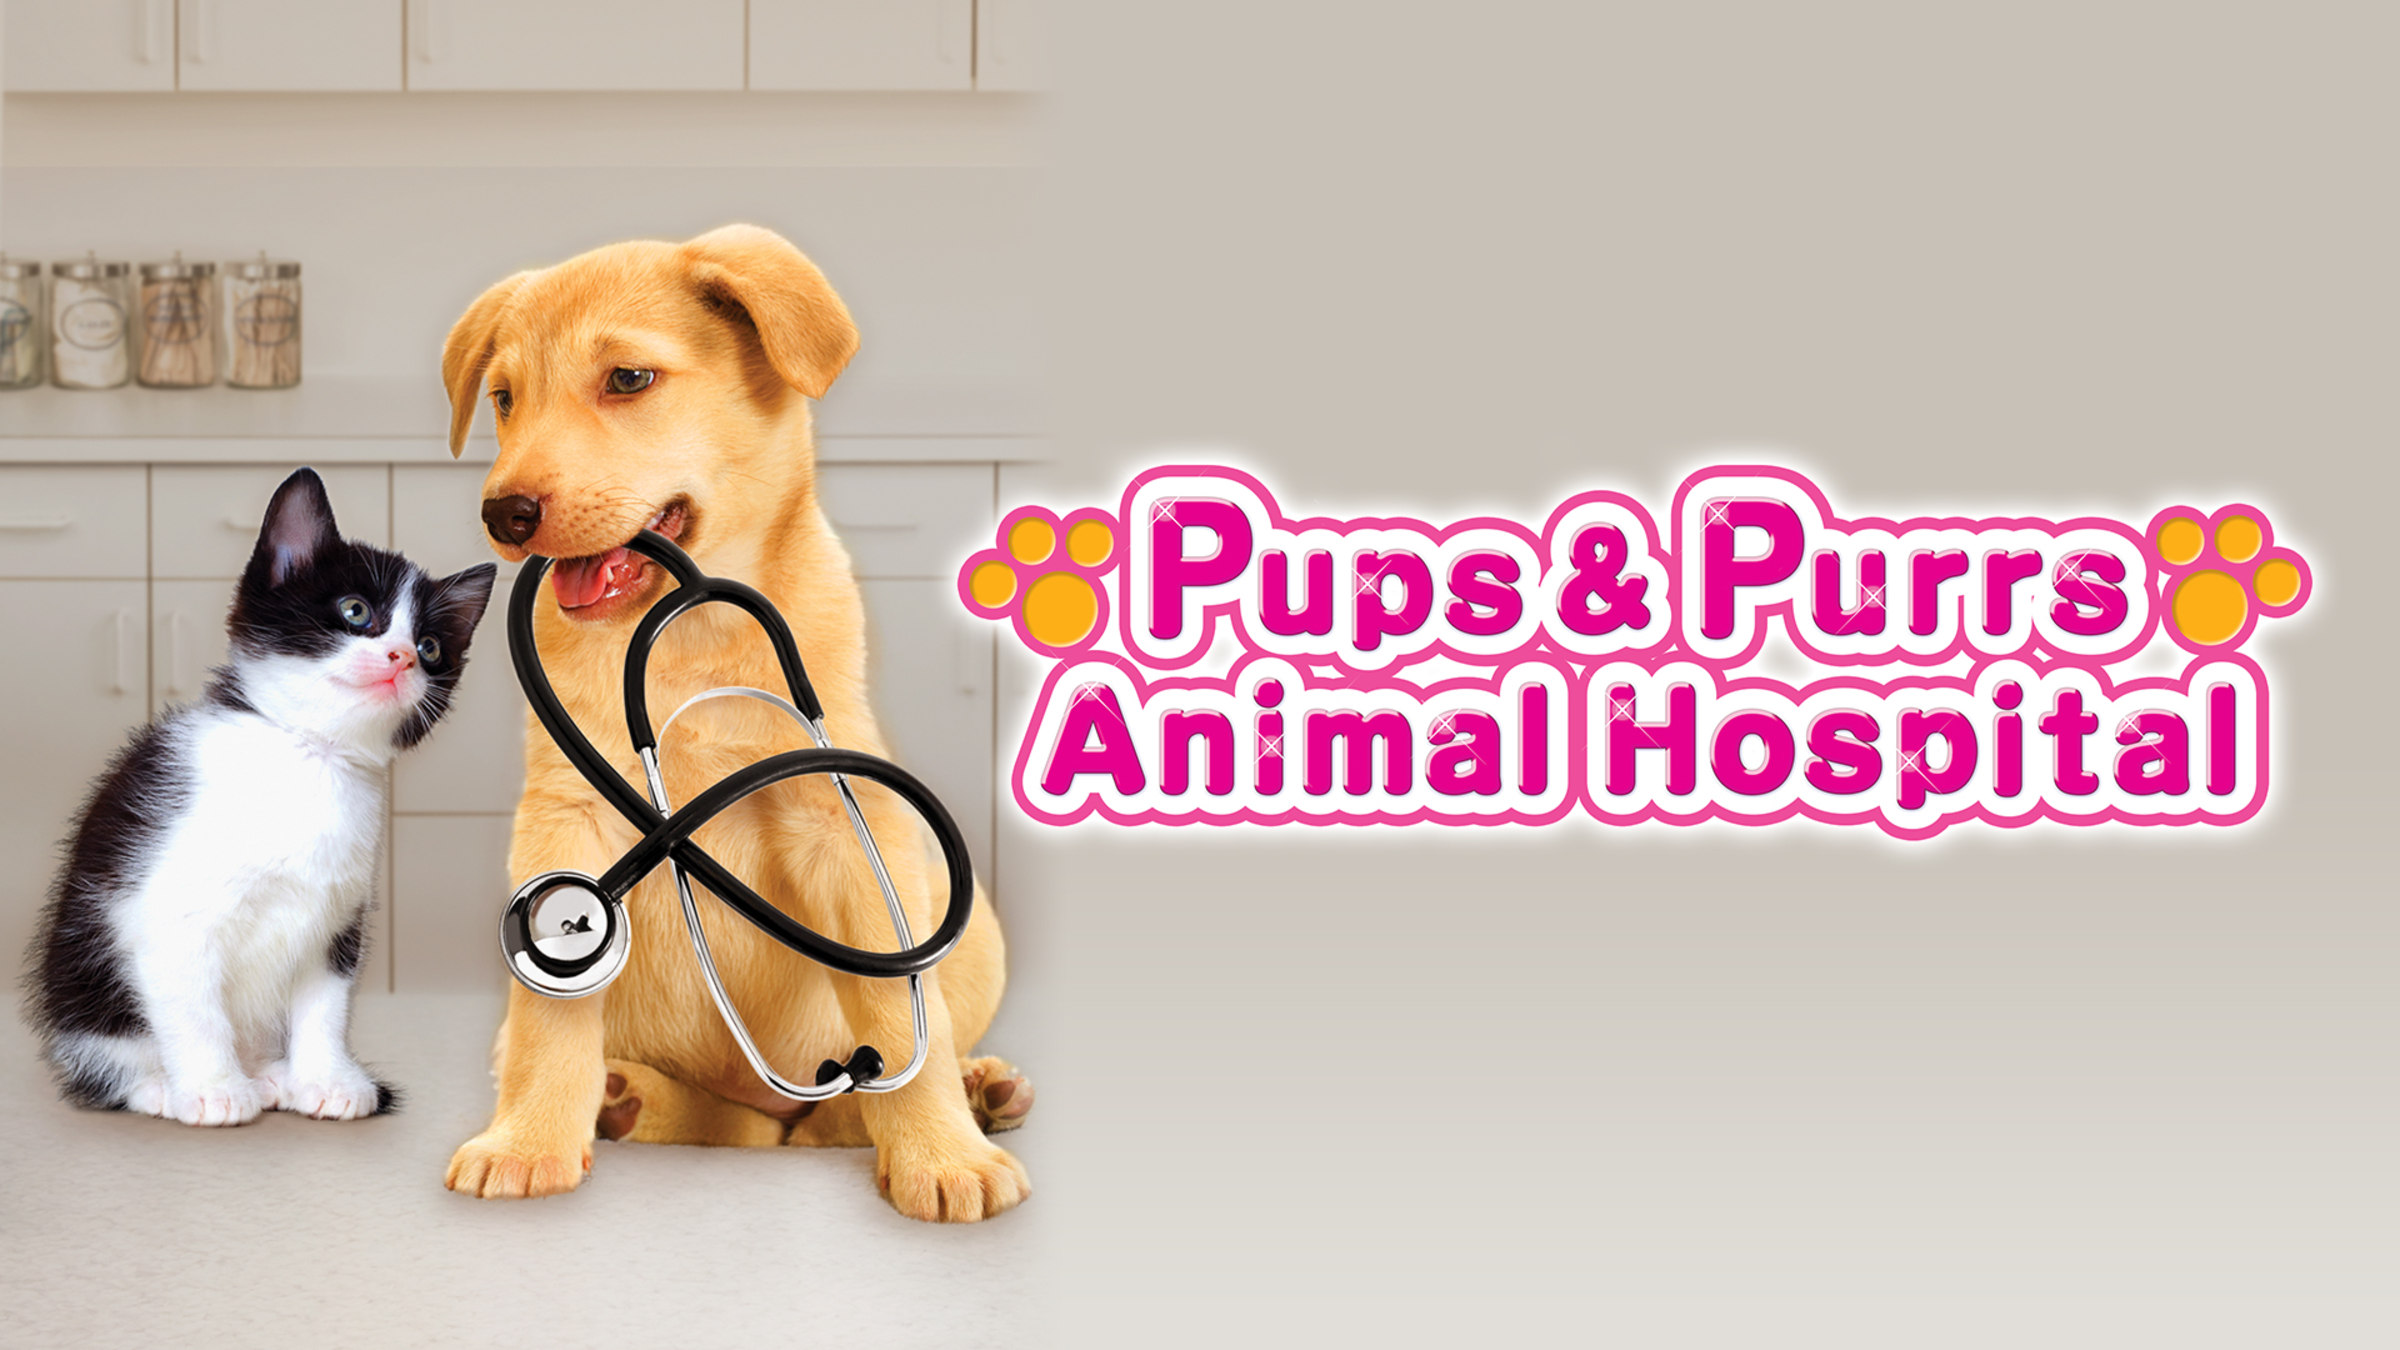 Pups & Purrs Animal Hospital for Nintendo Switch - Nintendo Official Site